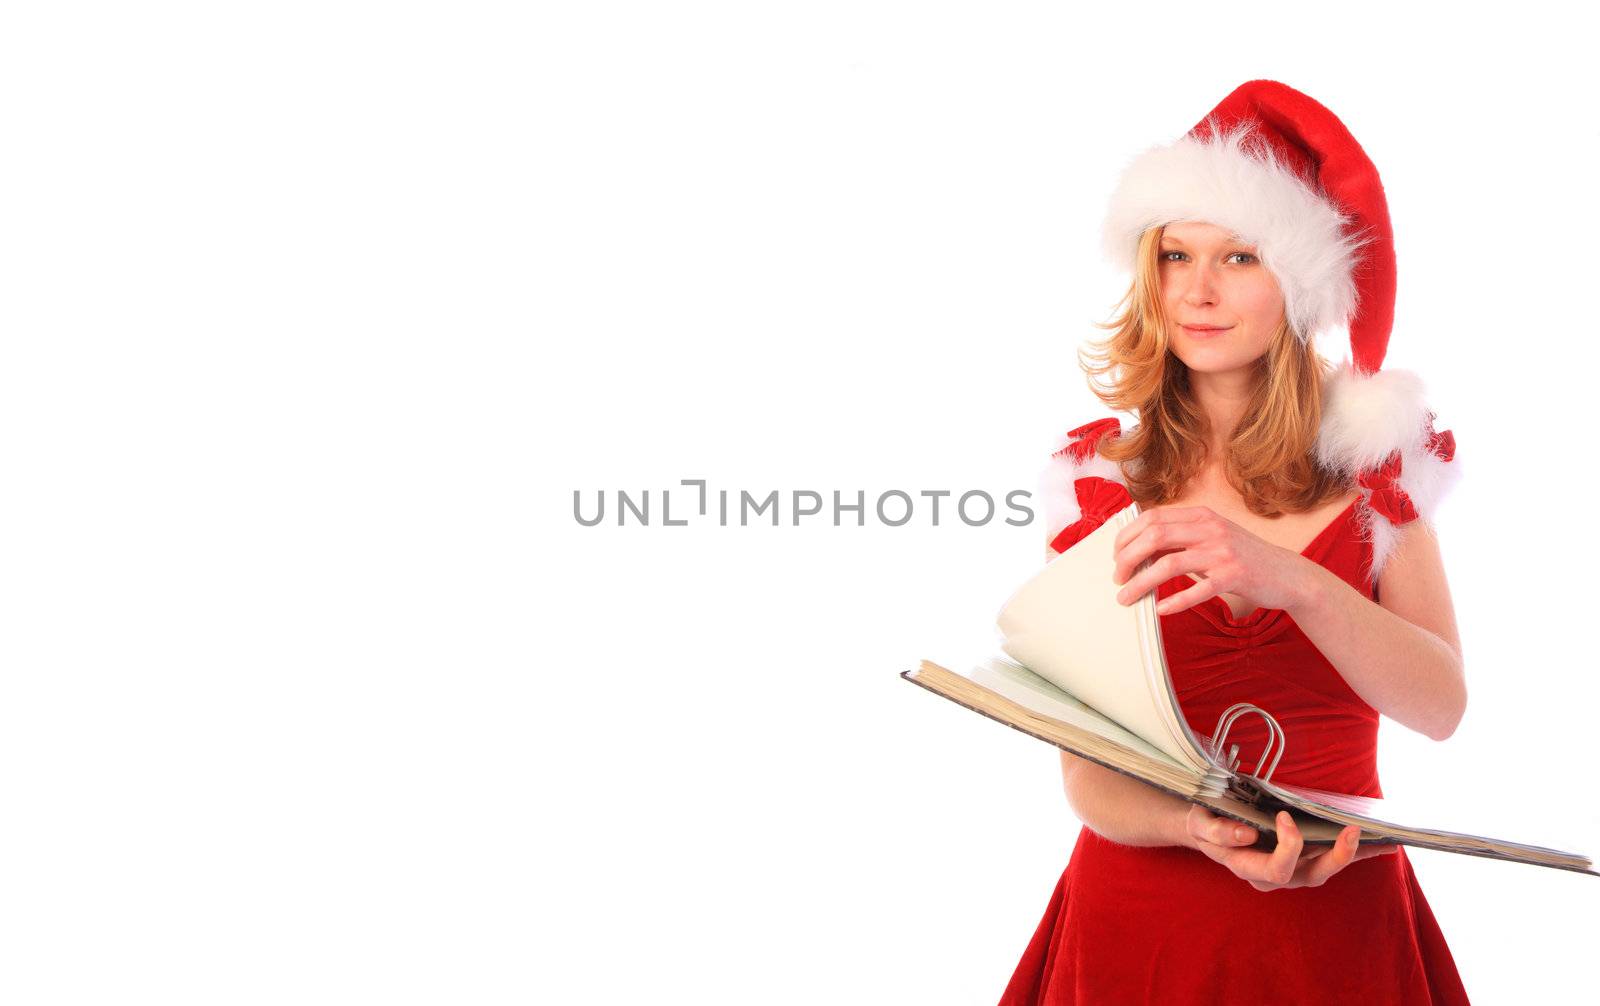 miss santa is holding a ring binder and page turning - bookkepping and paper work - whitespace on the left